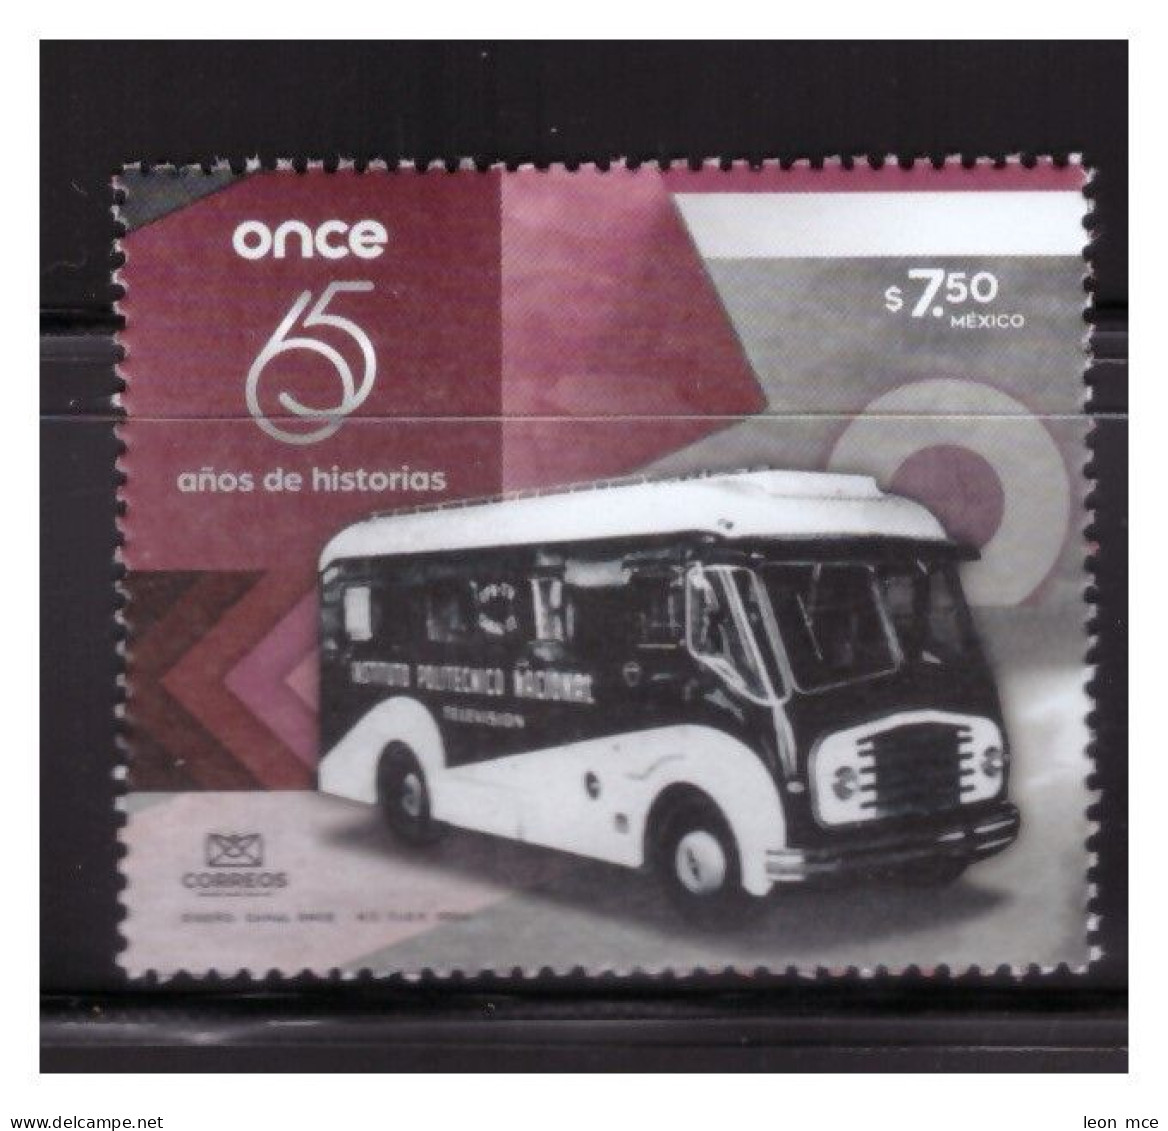 2024 MÉXICO Once. 65 Años De Historias, MNH Channel Eleven. TV, 65 Years Of Stories, COMMUNICATIONS, TRUCK - Mexique